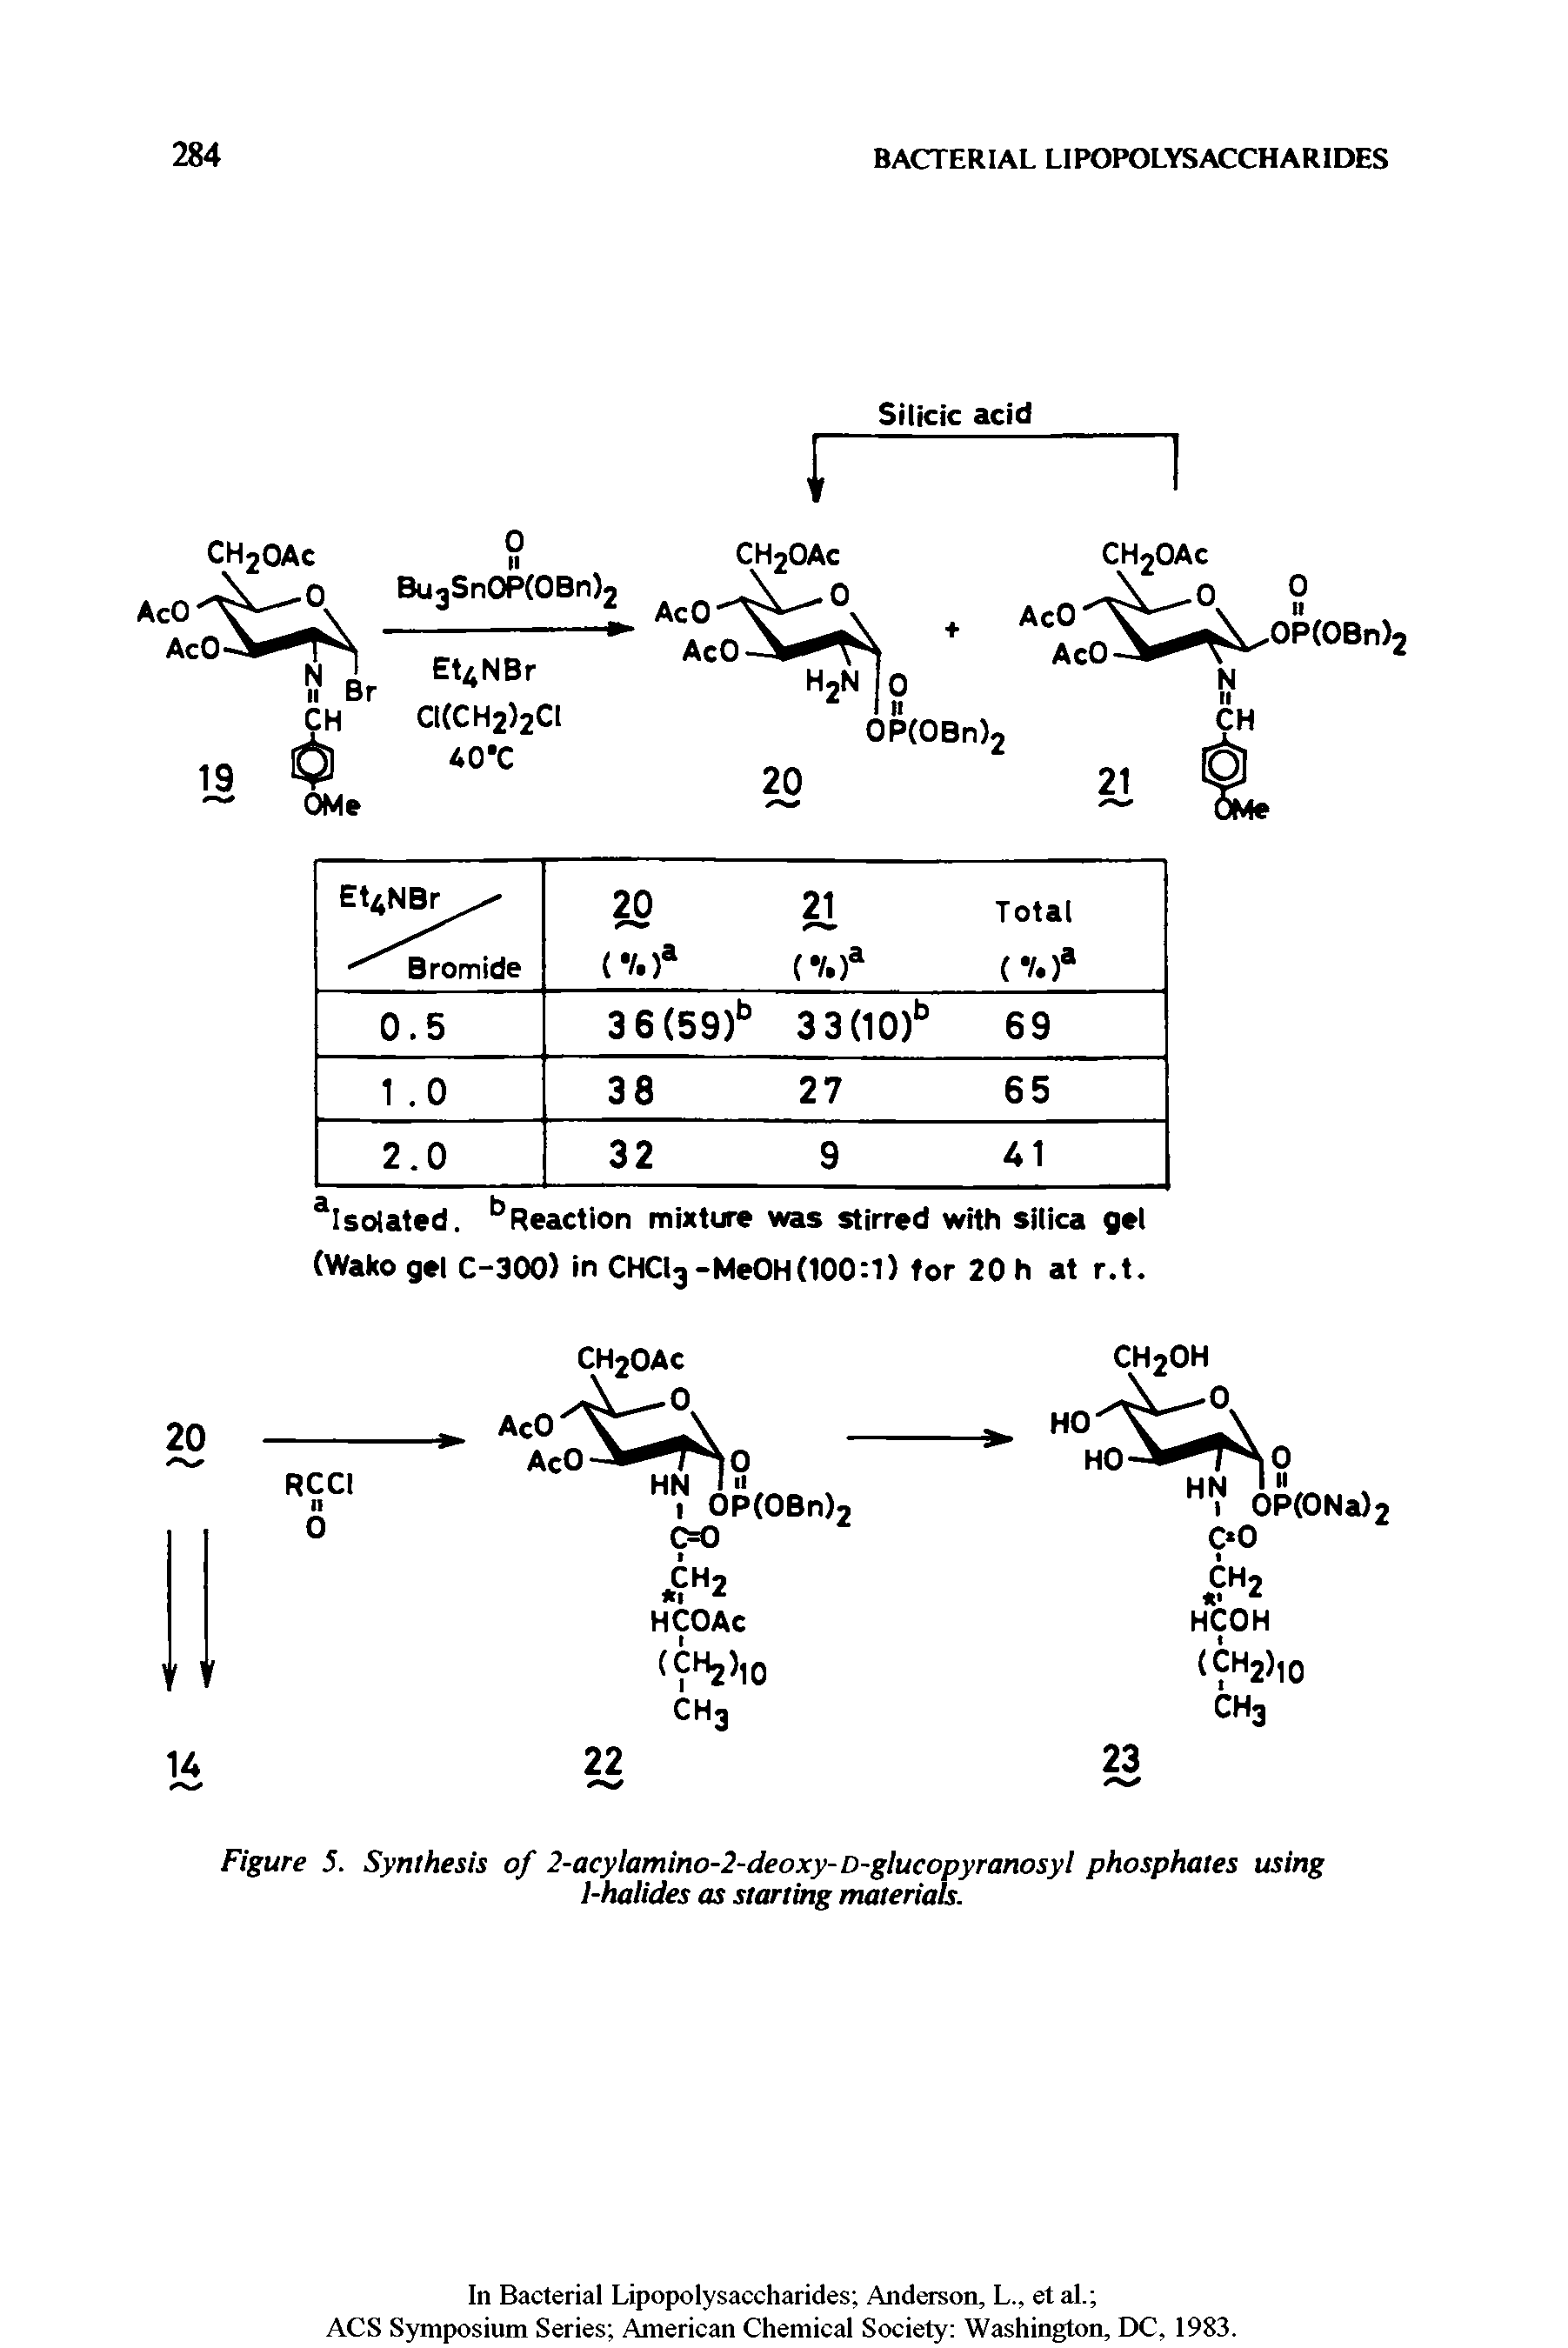 Figure 5. Synthesis of 2-acylamino-2-deoxy-D-glucopyranosyl phosphates using 1-halides as starting materials.